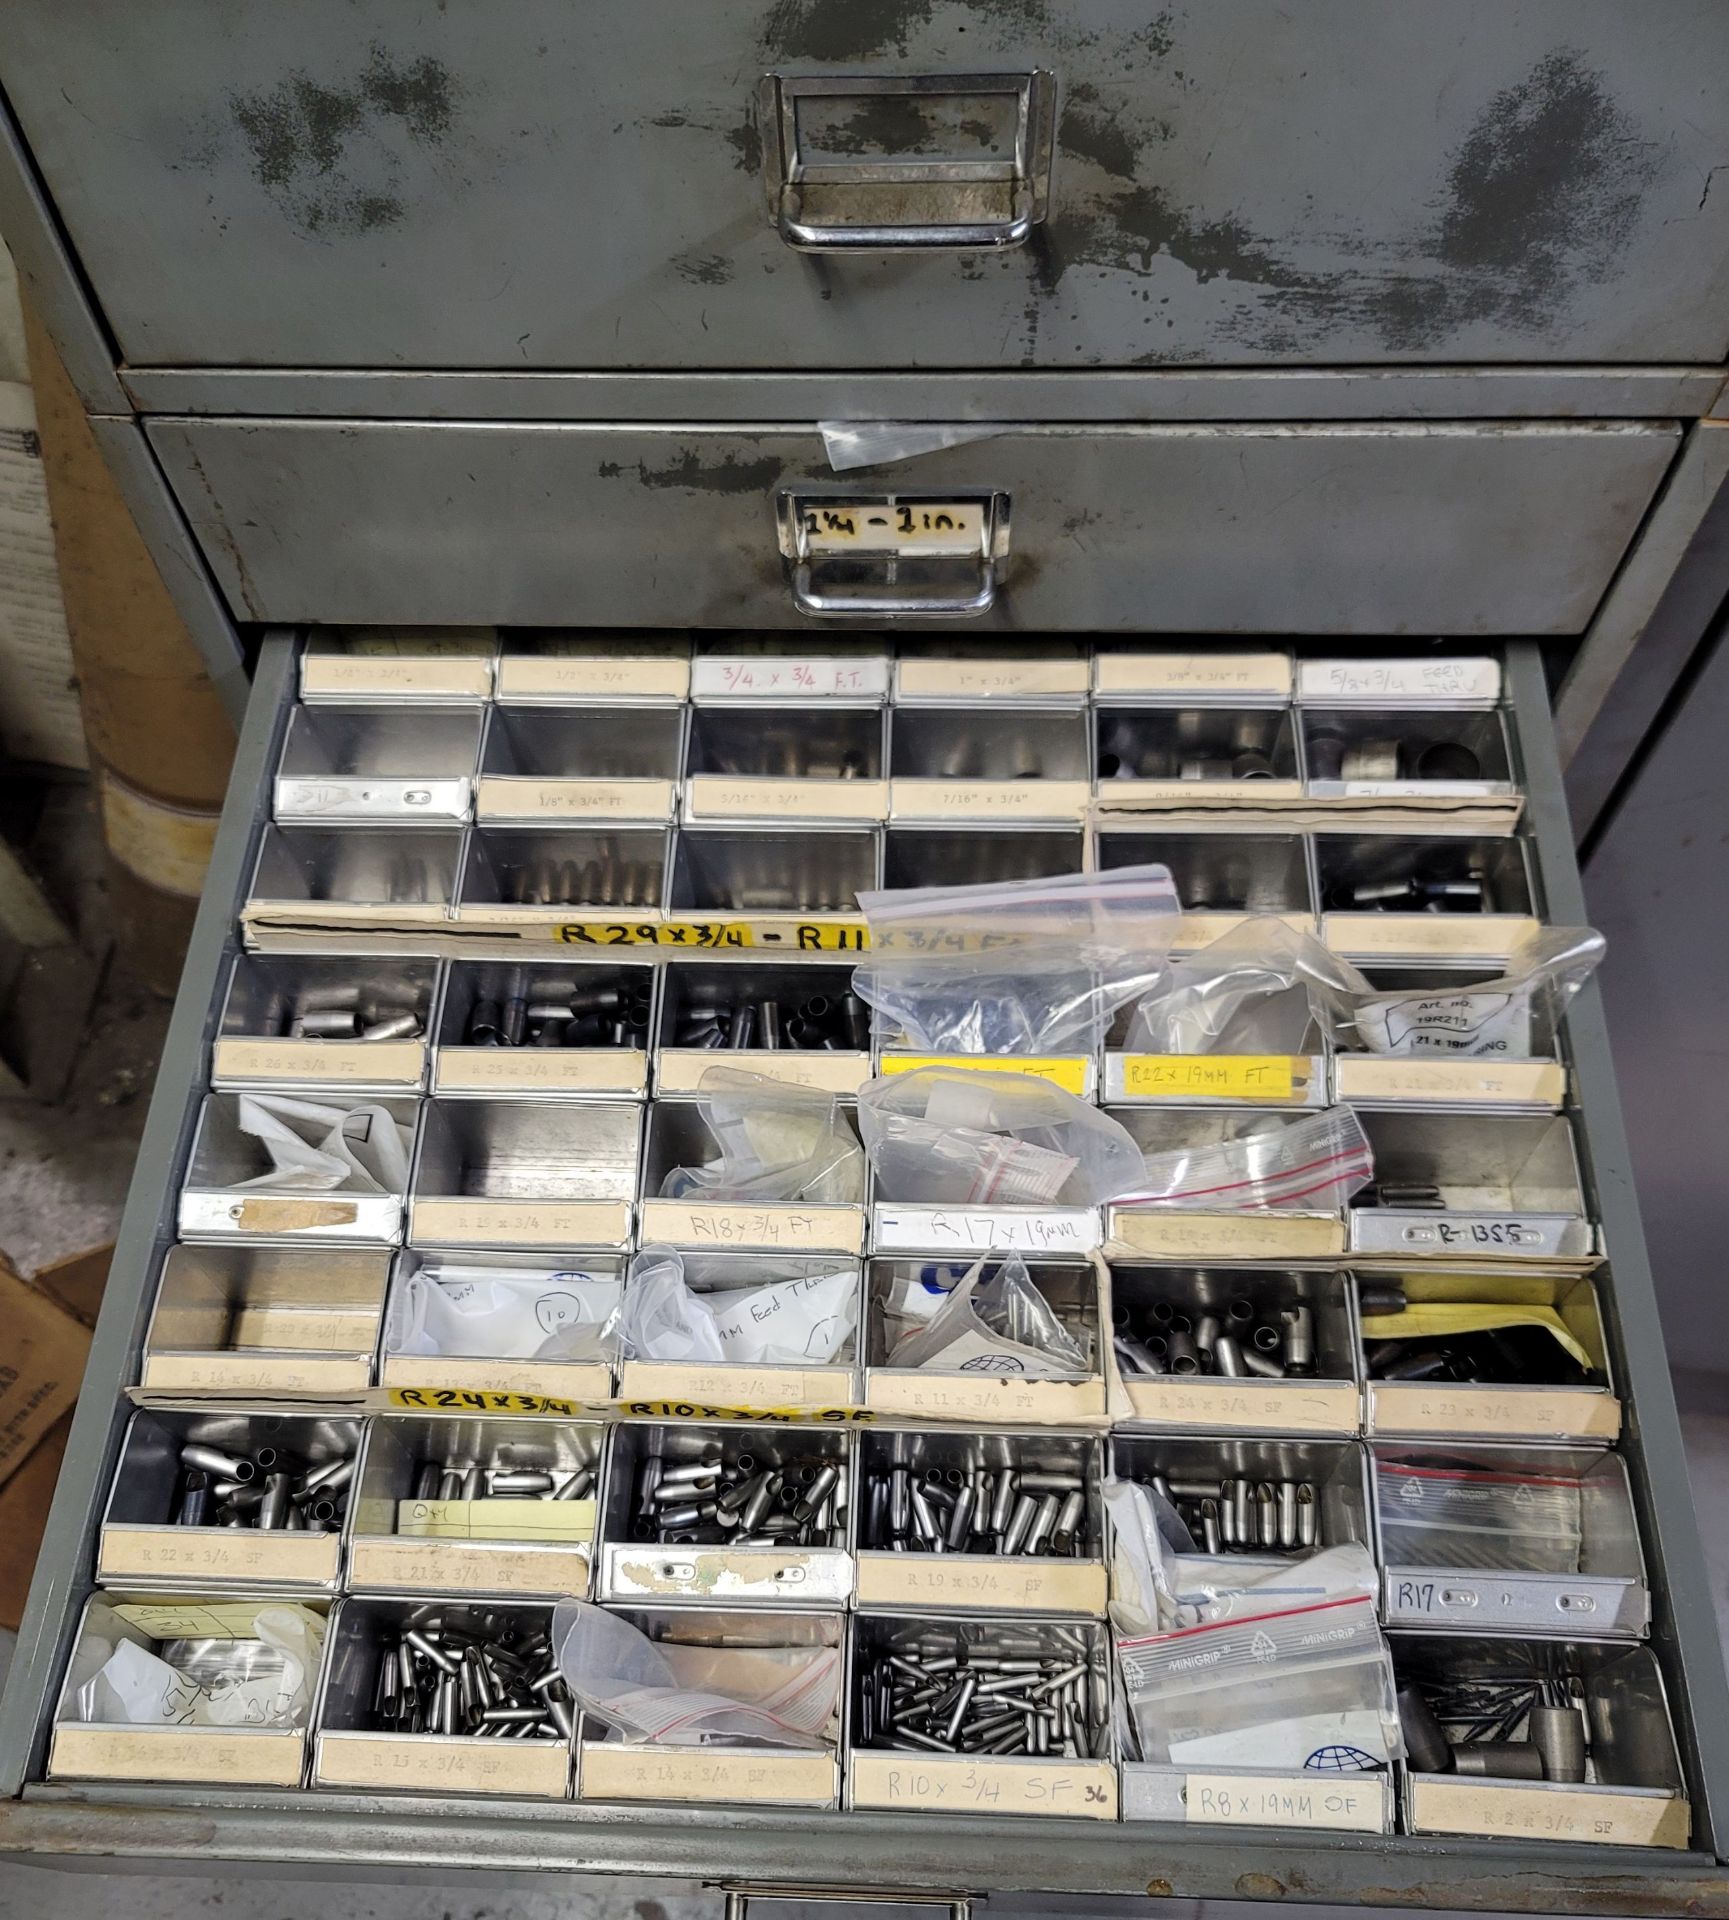 LOT - CABINET, W/ CONTENTS AND ITEMS ON TOP, FEED THRU PUNCHES - Image 5 of 7